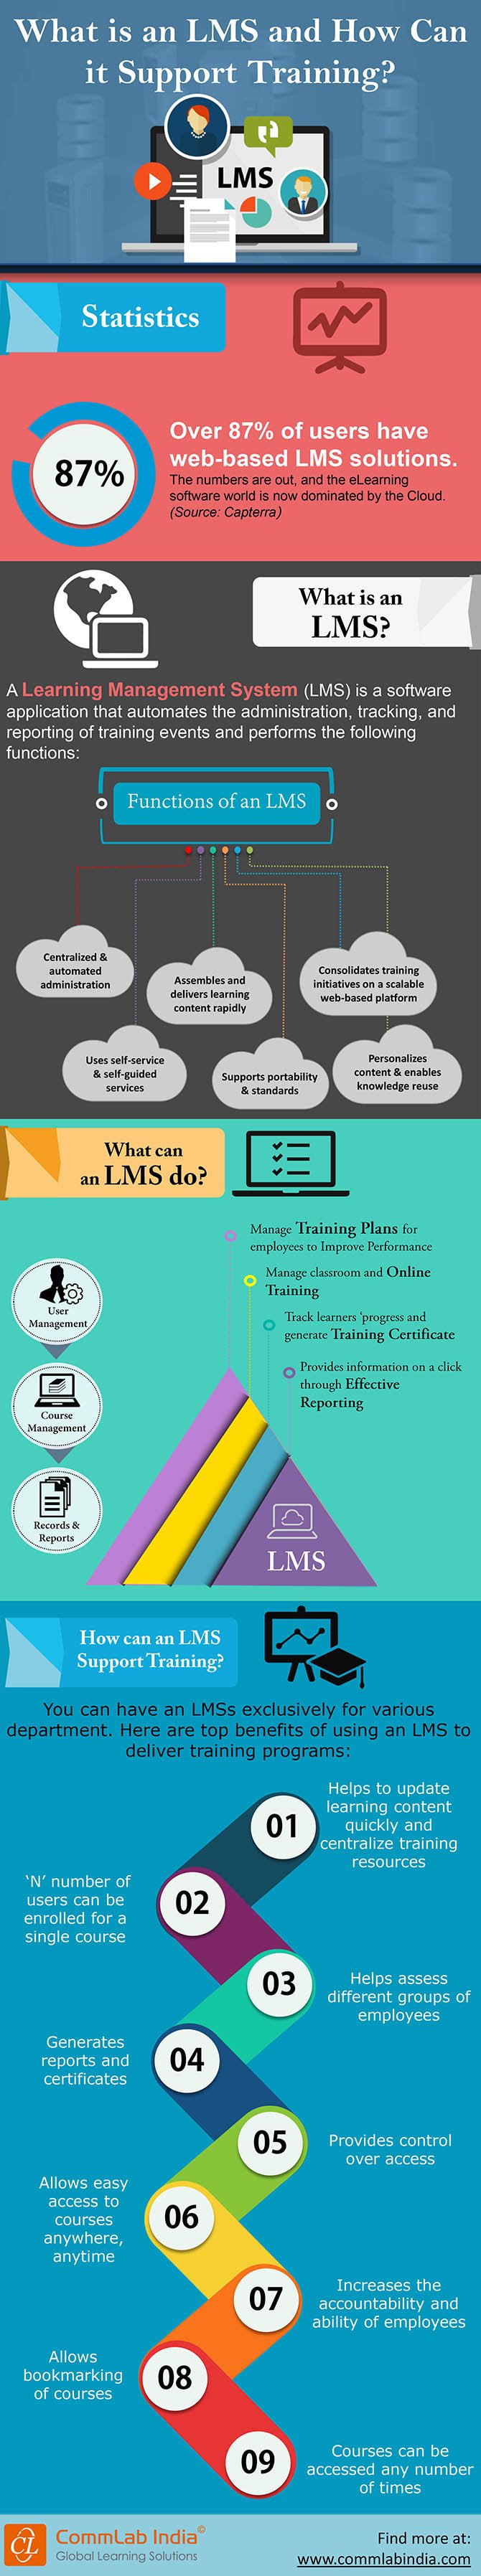 What is an LMS and How Can It Support Training? [Infographic]